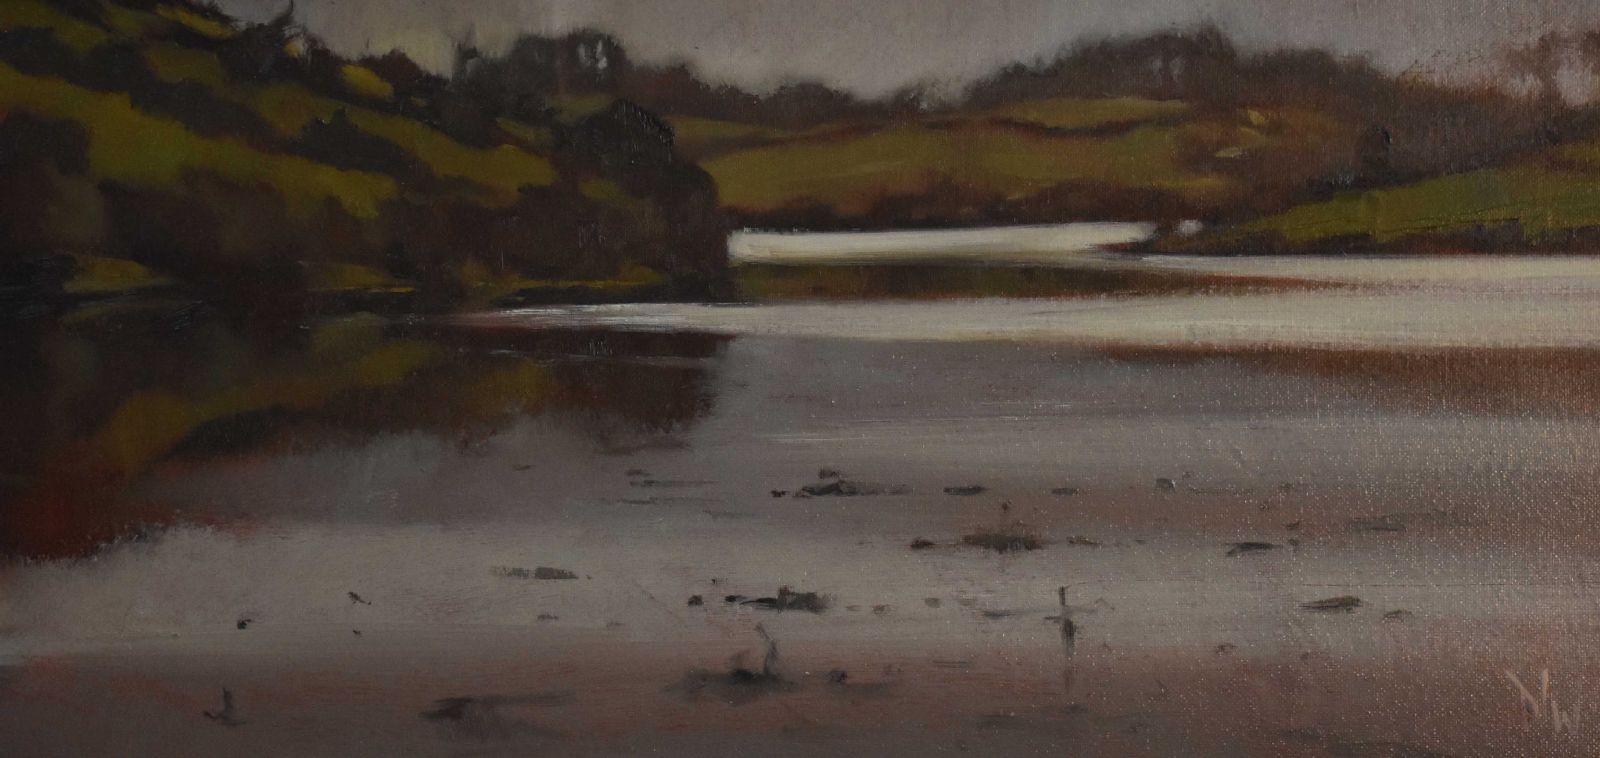 ‘Traces’ (Castle Island, Strangford Lough)  by Dave West